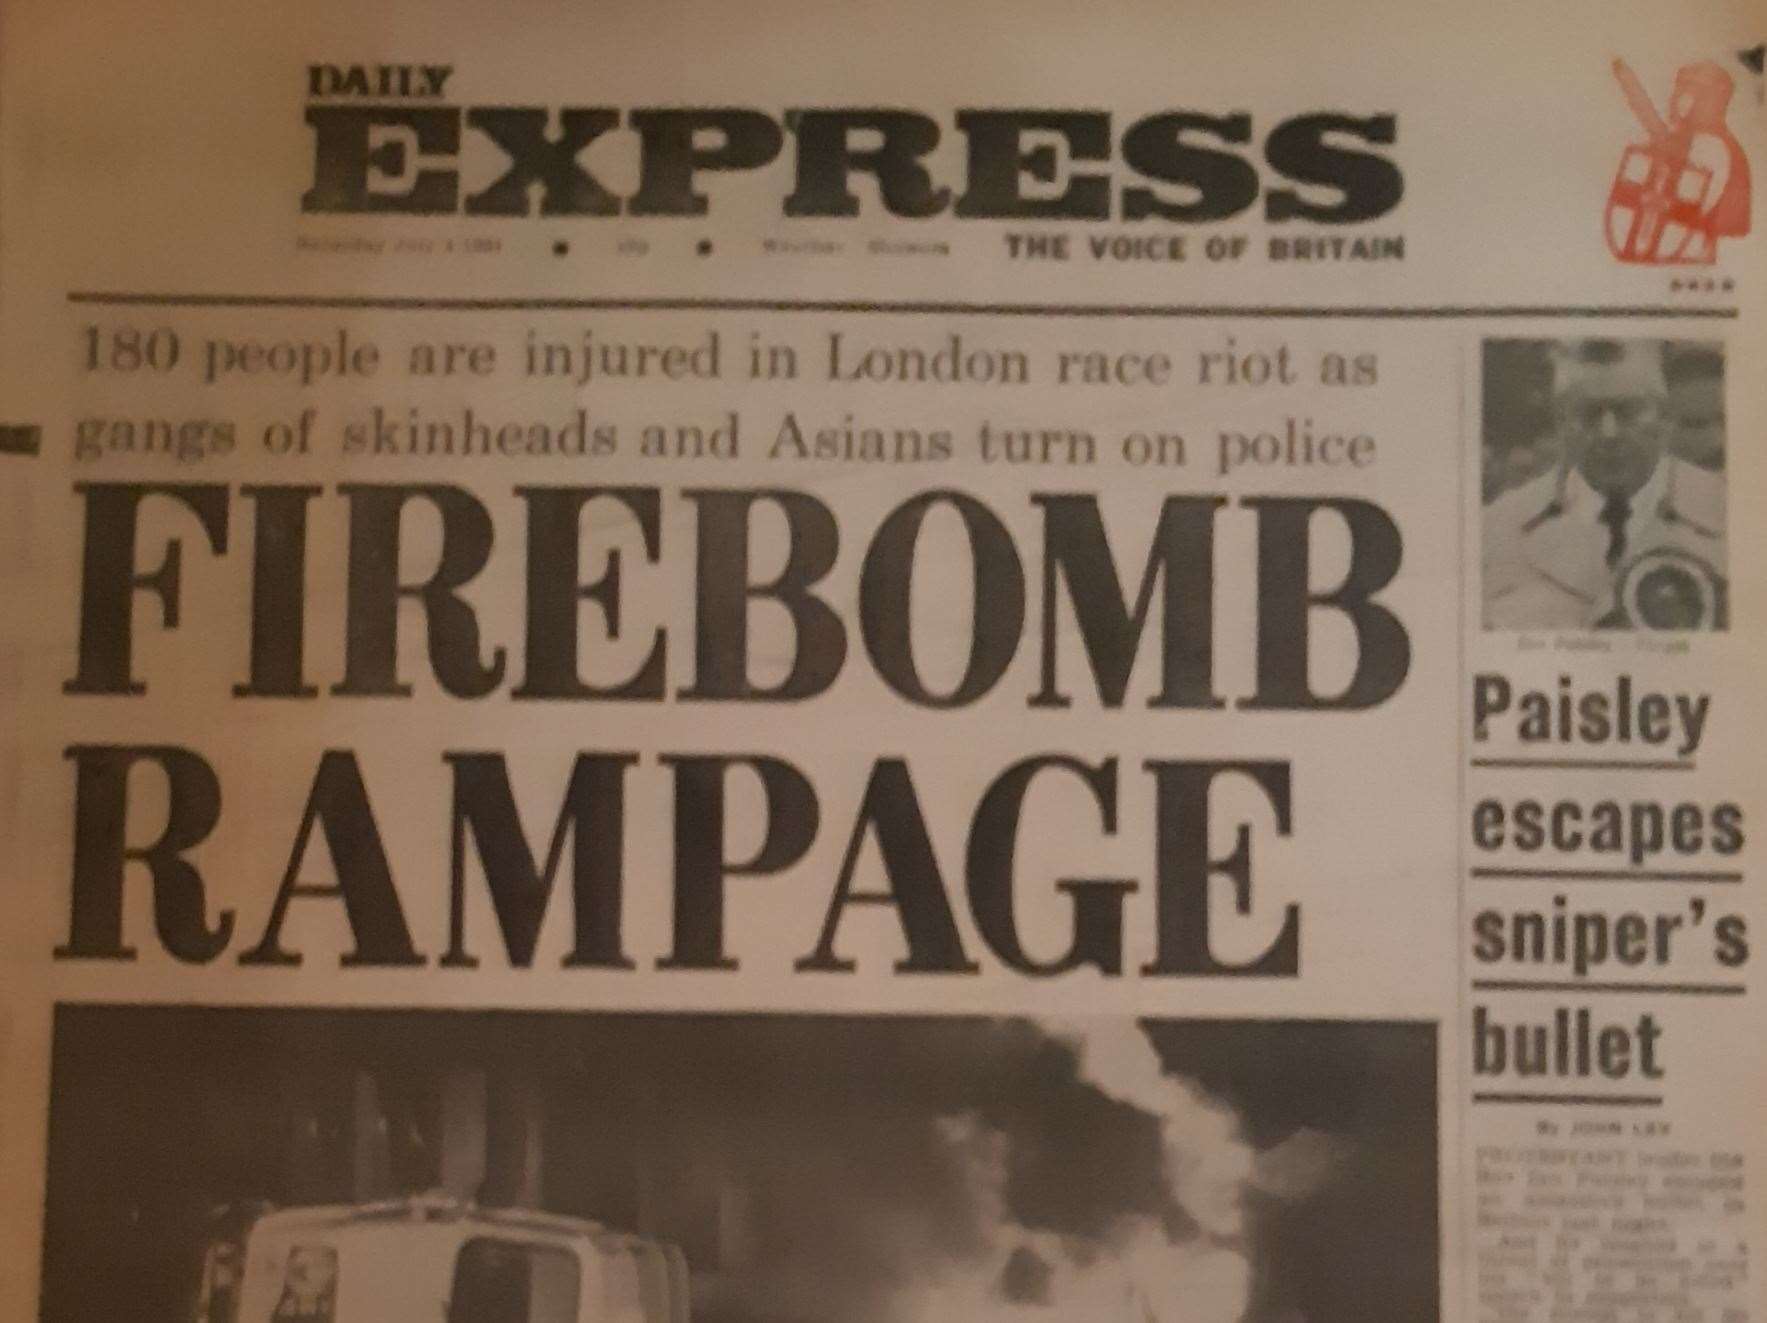 The Daily Express, July 4, 1981, reporting on the first of the riots, in Southall